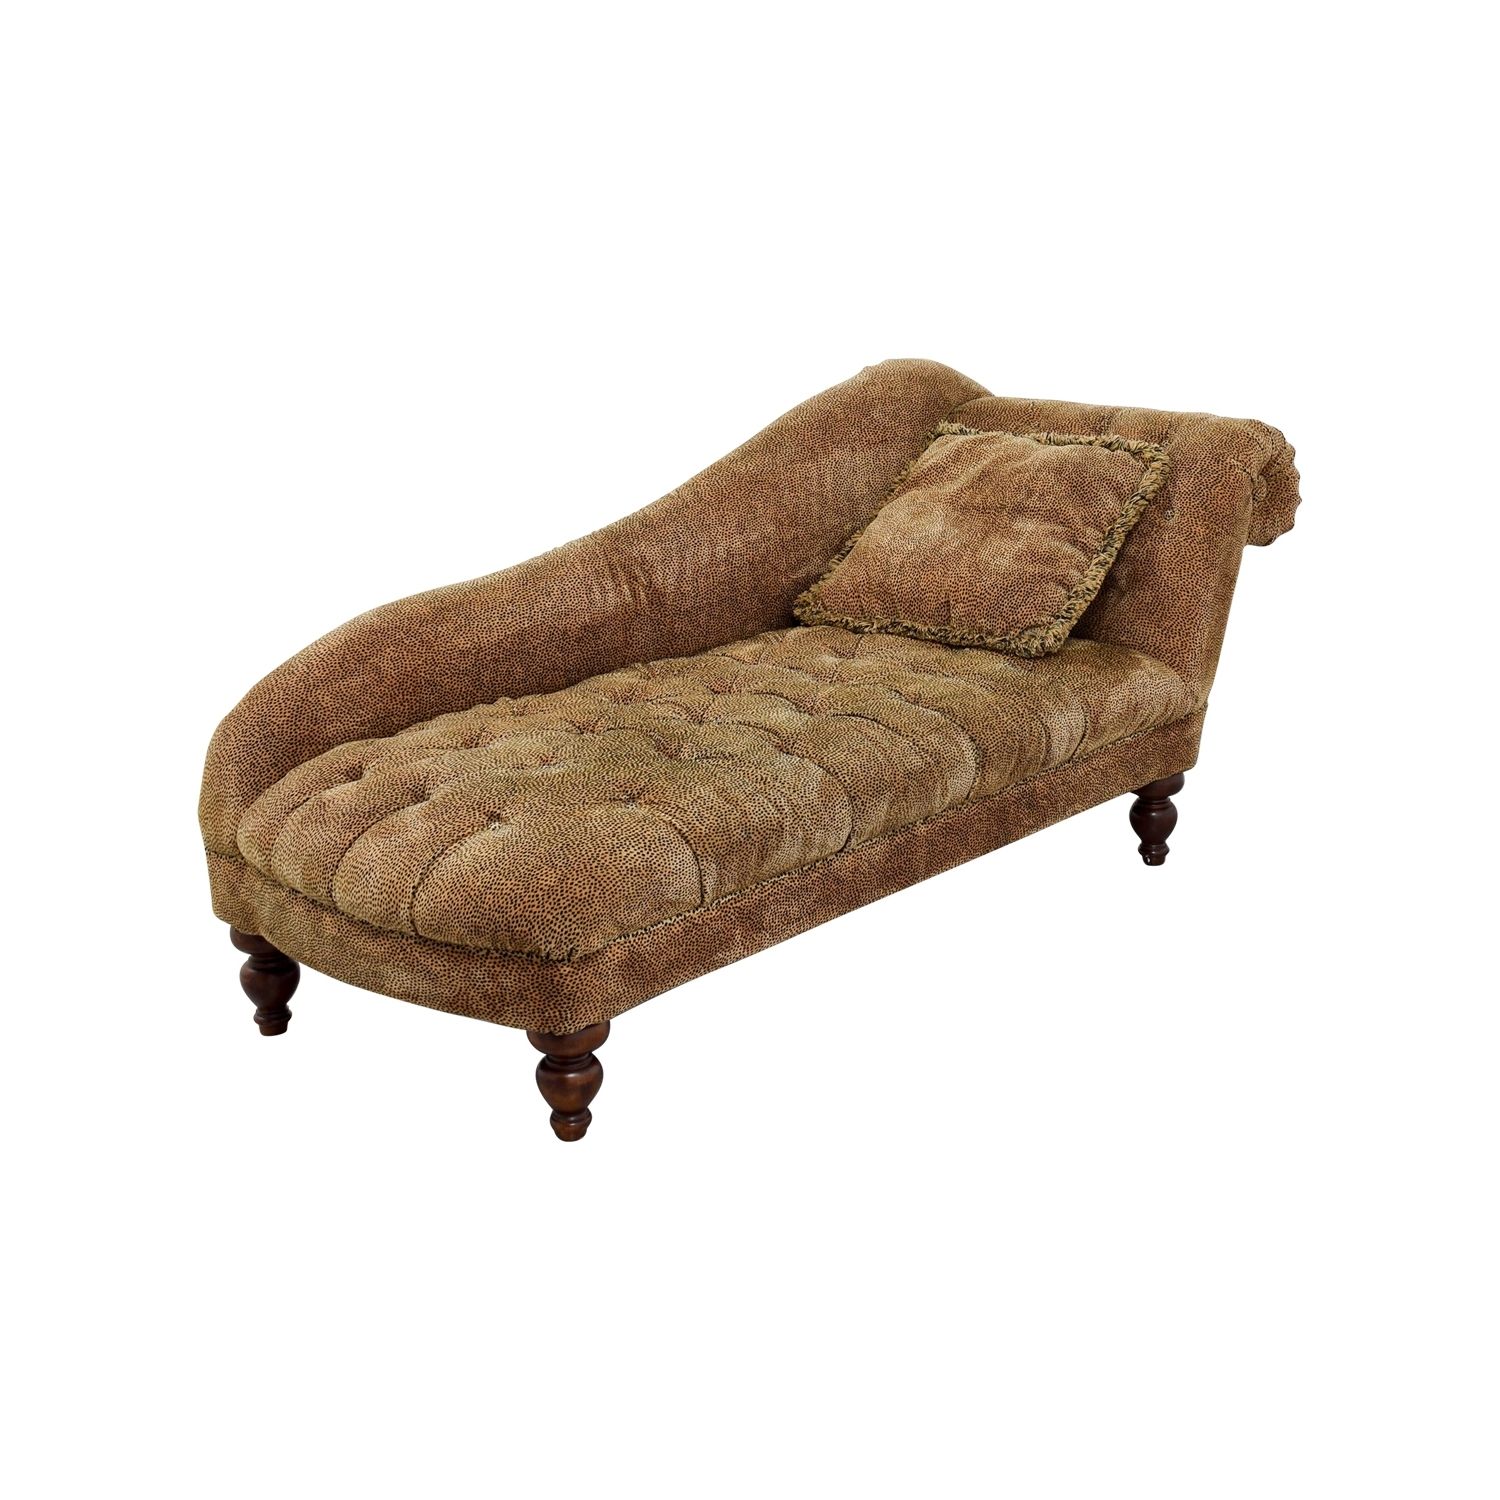 [%73% Off – Domain Home Furnishings Domain Home Furnishings Leopard Intended For Well Liked Leopard Chaises|leopard Chaises Throughout Current 73% Off – Domain Home Furnishings Domain Home Furnishings Leopard|2018 Leopard Chaises In 73% Off – Domain Home Furnishings Domain Home Furnishings Leopard|2017 73% Off – Domain Home Furnishings Domain Home Furnishings Leopard With Regard To Leopard Chaises%] (View 3 of 15)